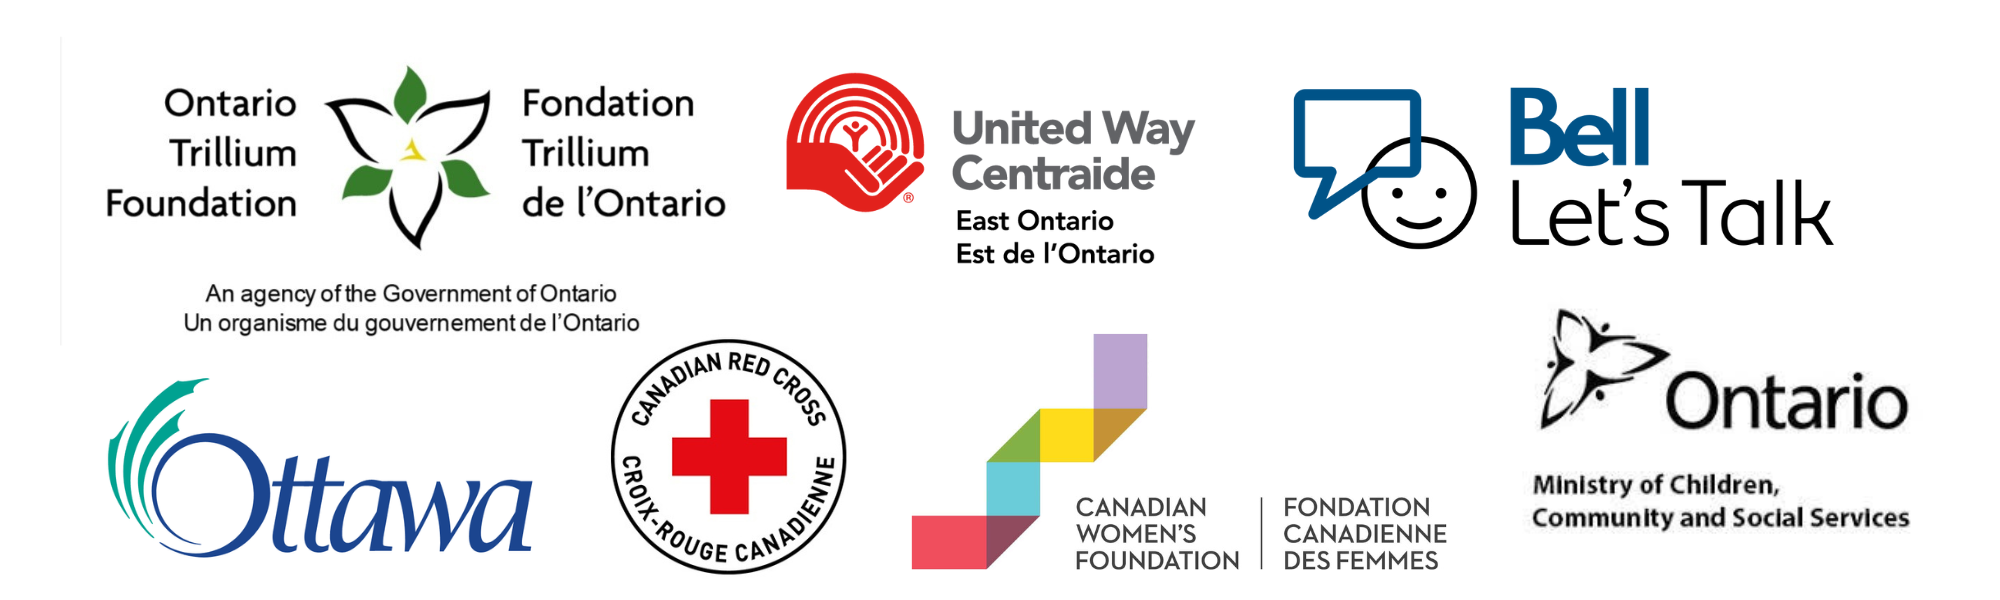 Ottawa Rape Crisis Centre gratefully acknowledges the financial support of the following funders. | Ottawa Rape Crisis Centre tient à remercier sincèrement les bailleurs de fonds suivants de leur soutien financier. • City of Ottawa • United Way of Eastern Ontario • Ontario’s Ministry of Children, Community and Social Services • Canadian Women’s Foundation • Bell Let’s Talk • Ontario Trillium Foundation • Canadian Red Cross